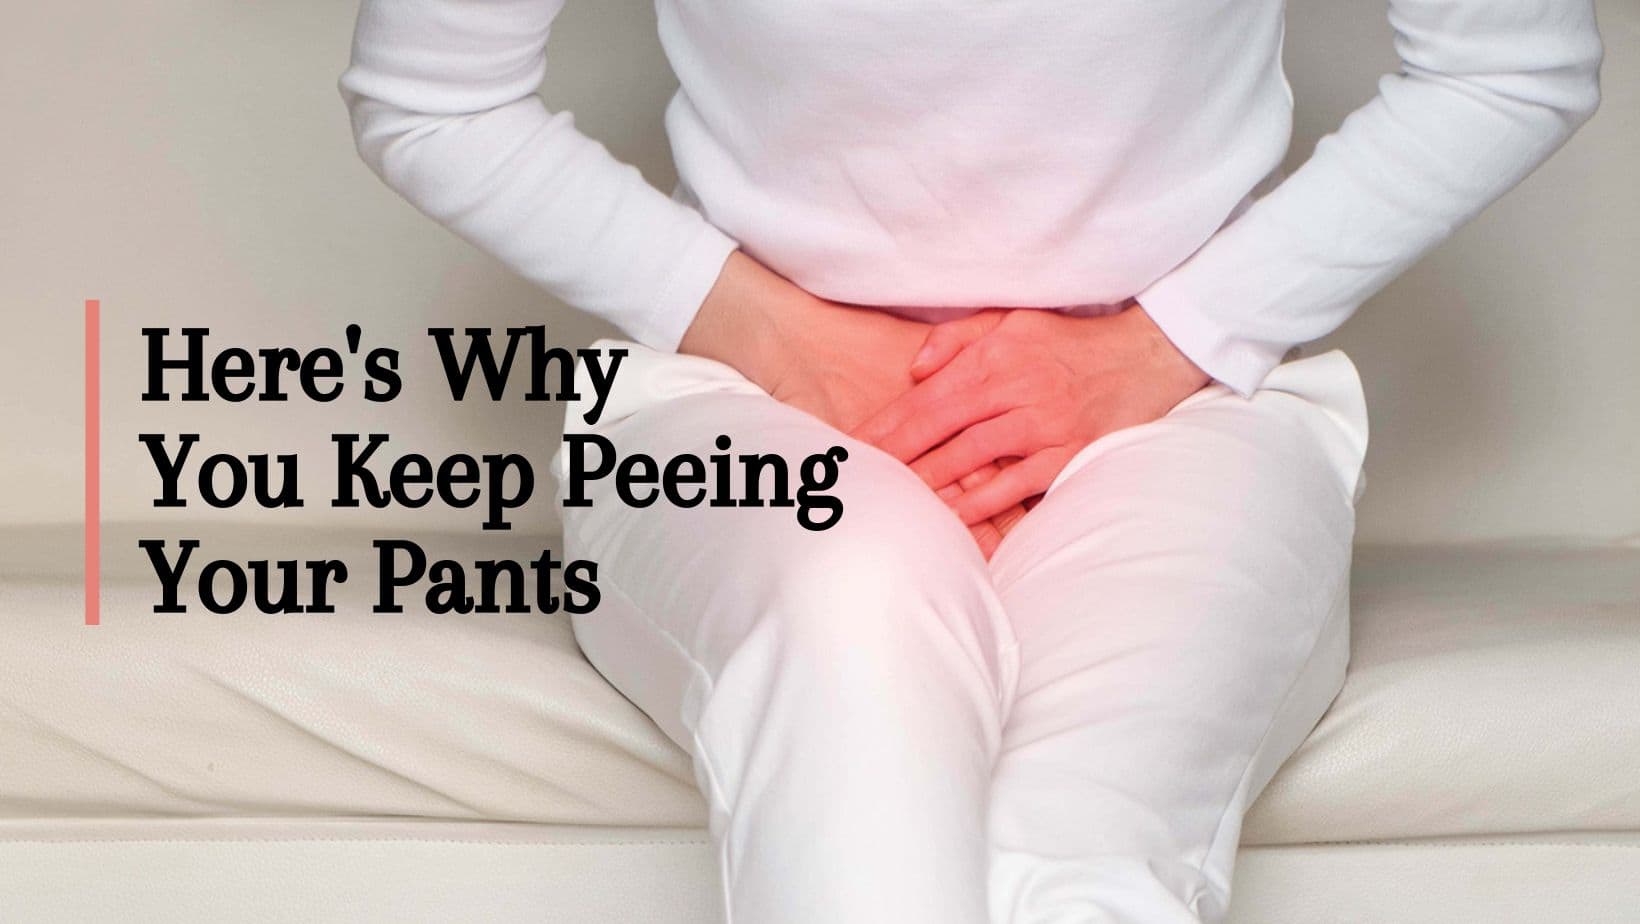 I Am Peeing In My Pants Without Realising Is It a Bladder Infection? TheHealthSite